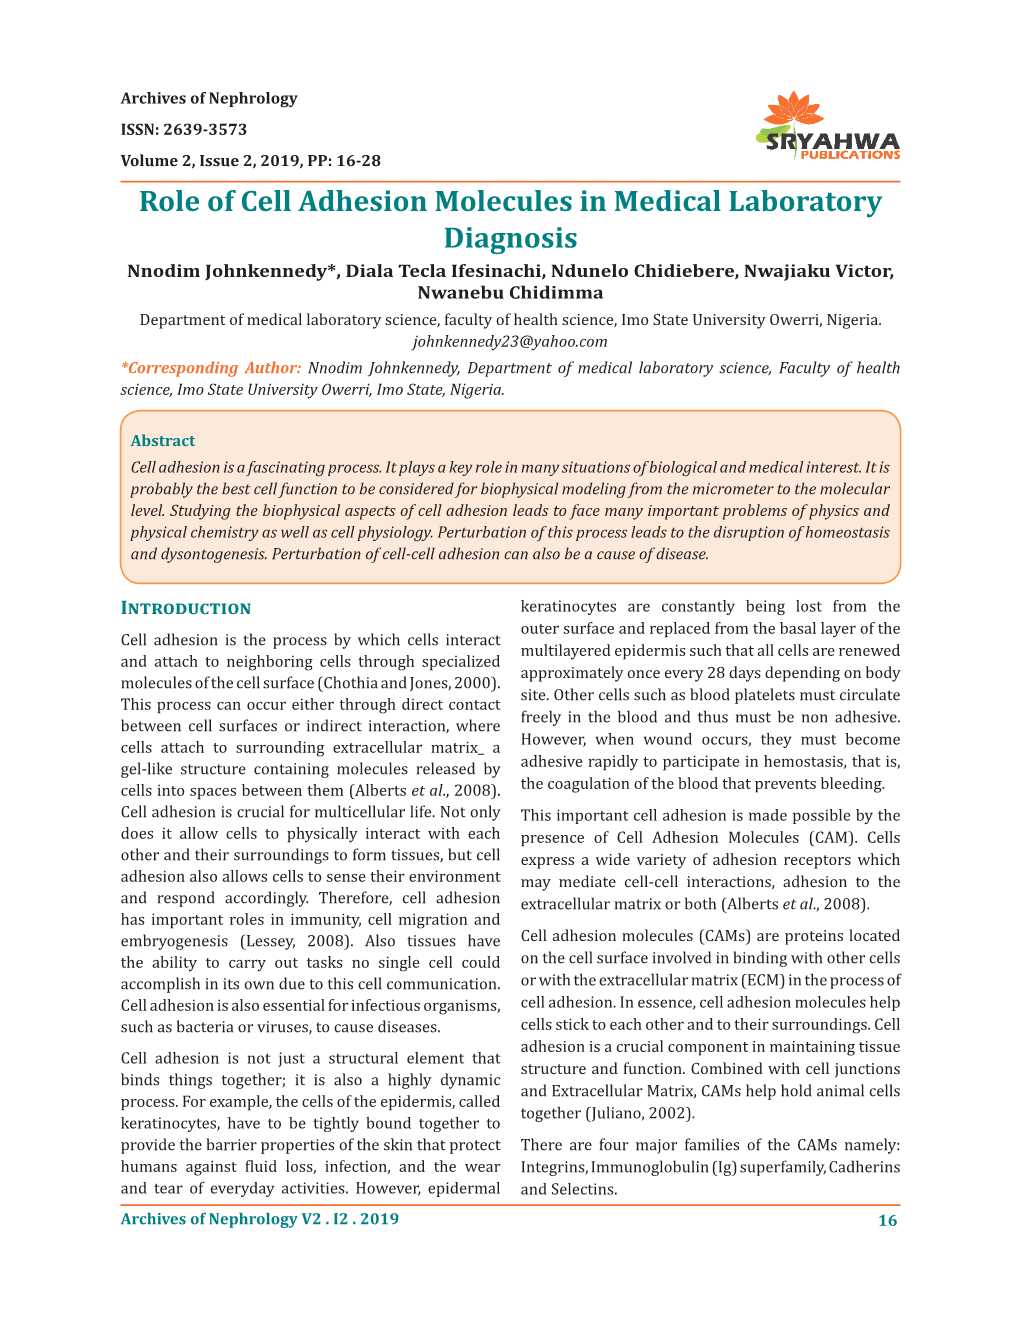 Role of Cell Adhesion Molecules in Medical Laboratory Diagnosis